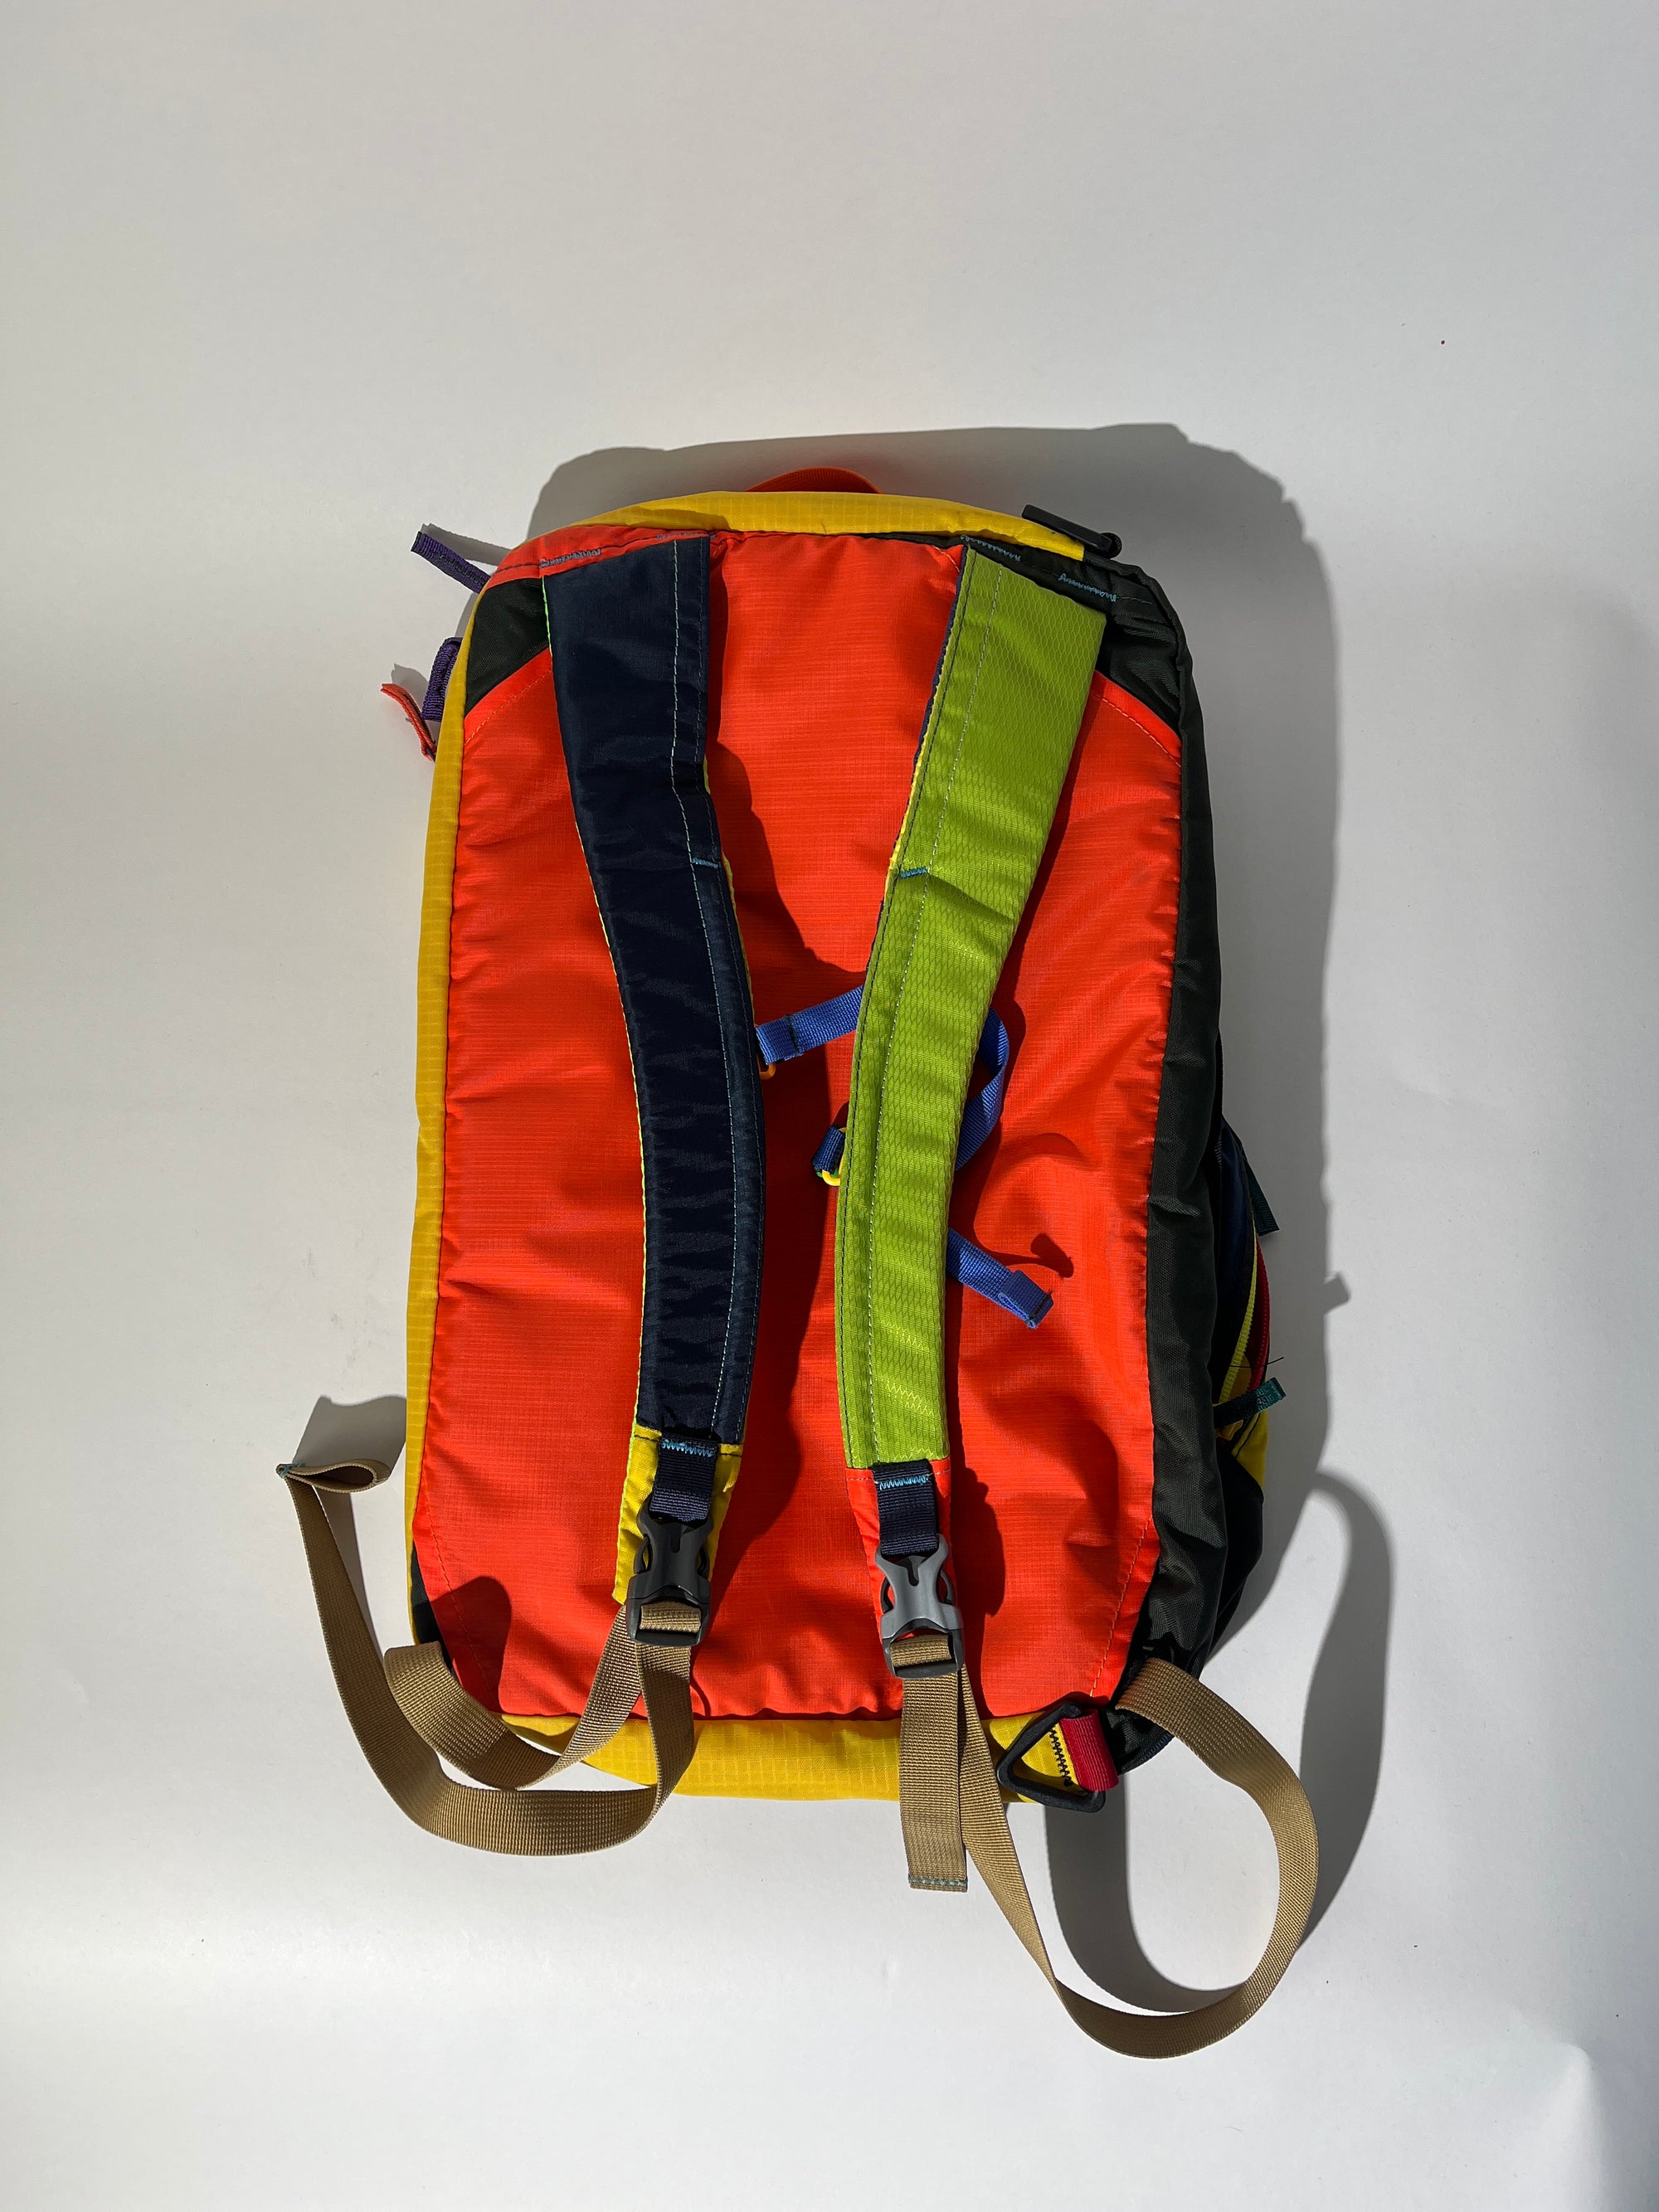 Cotopaxi Multicolor Backpack